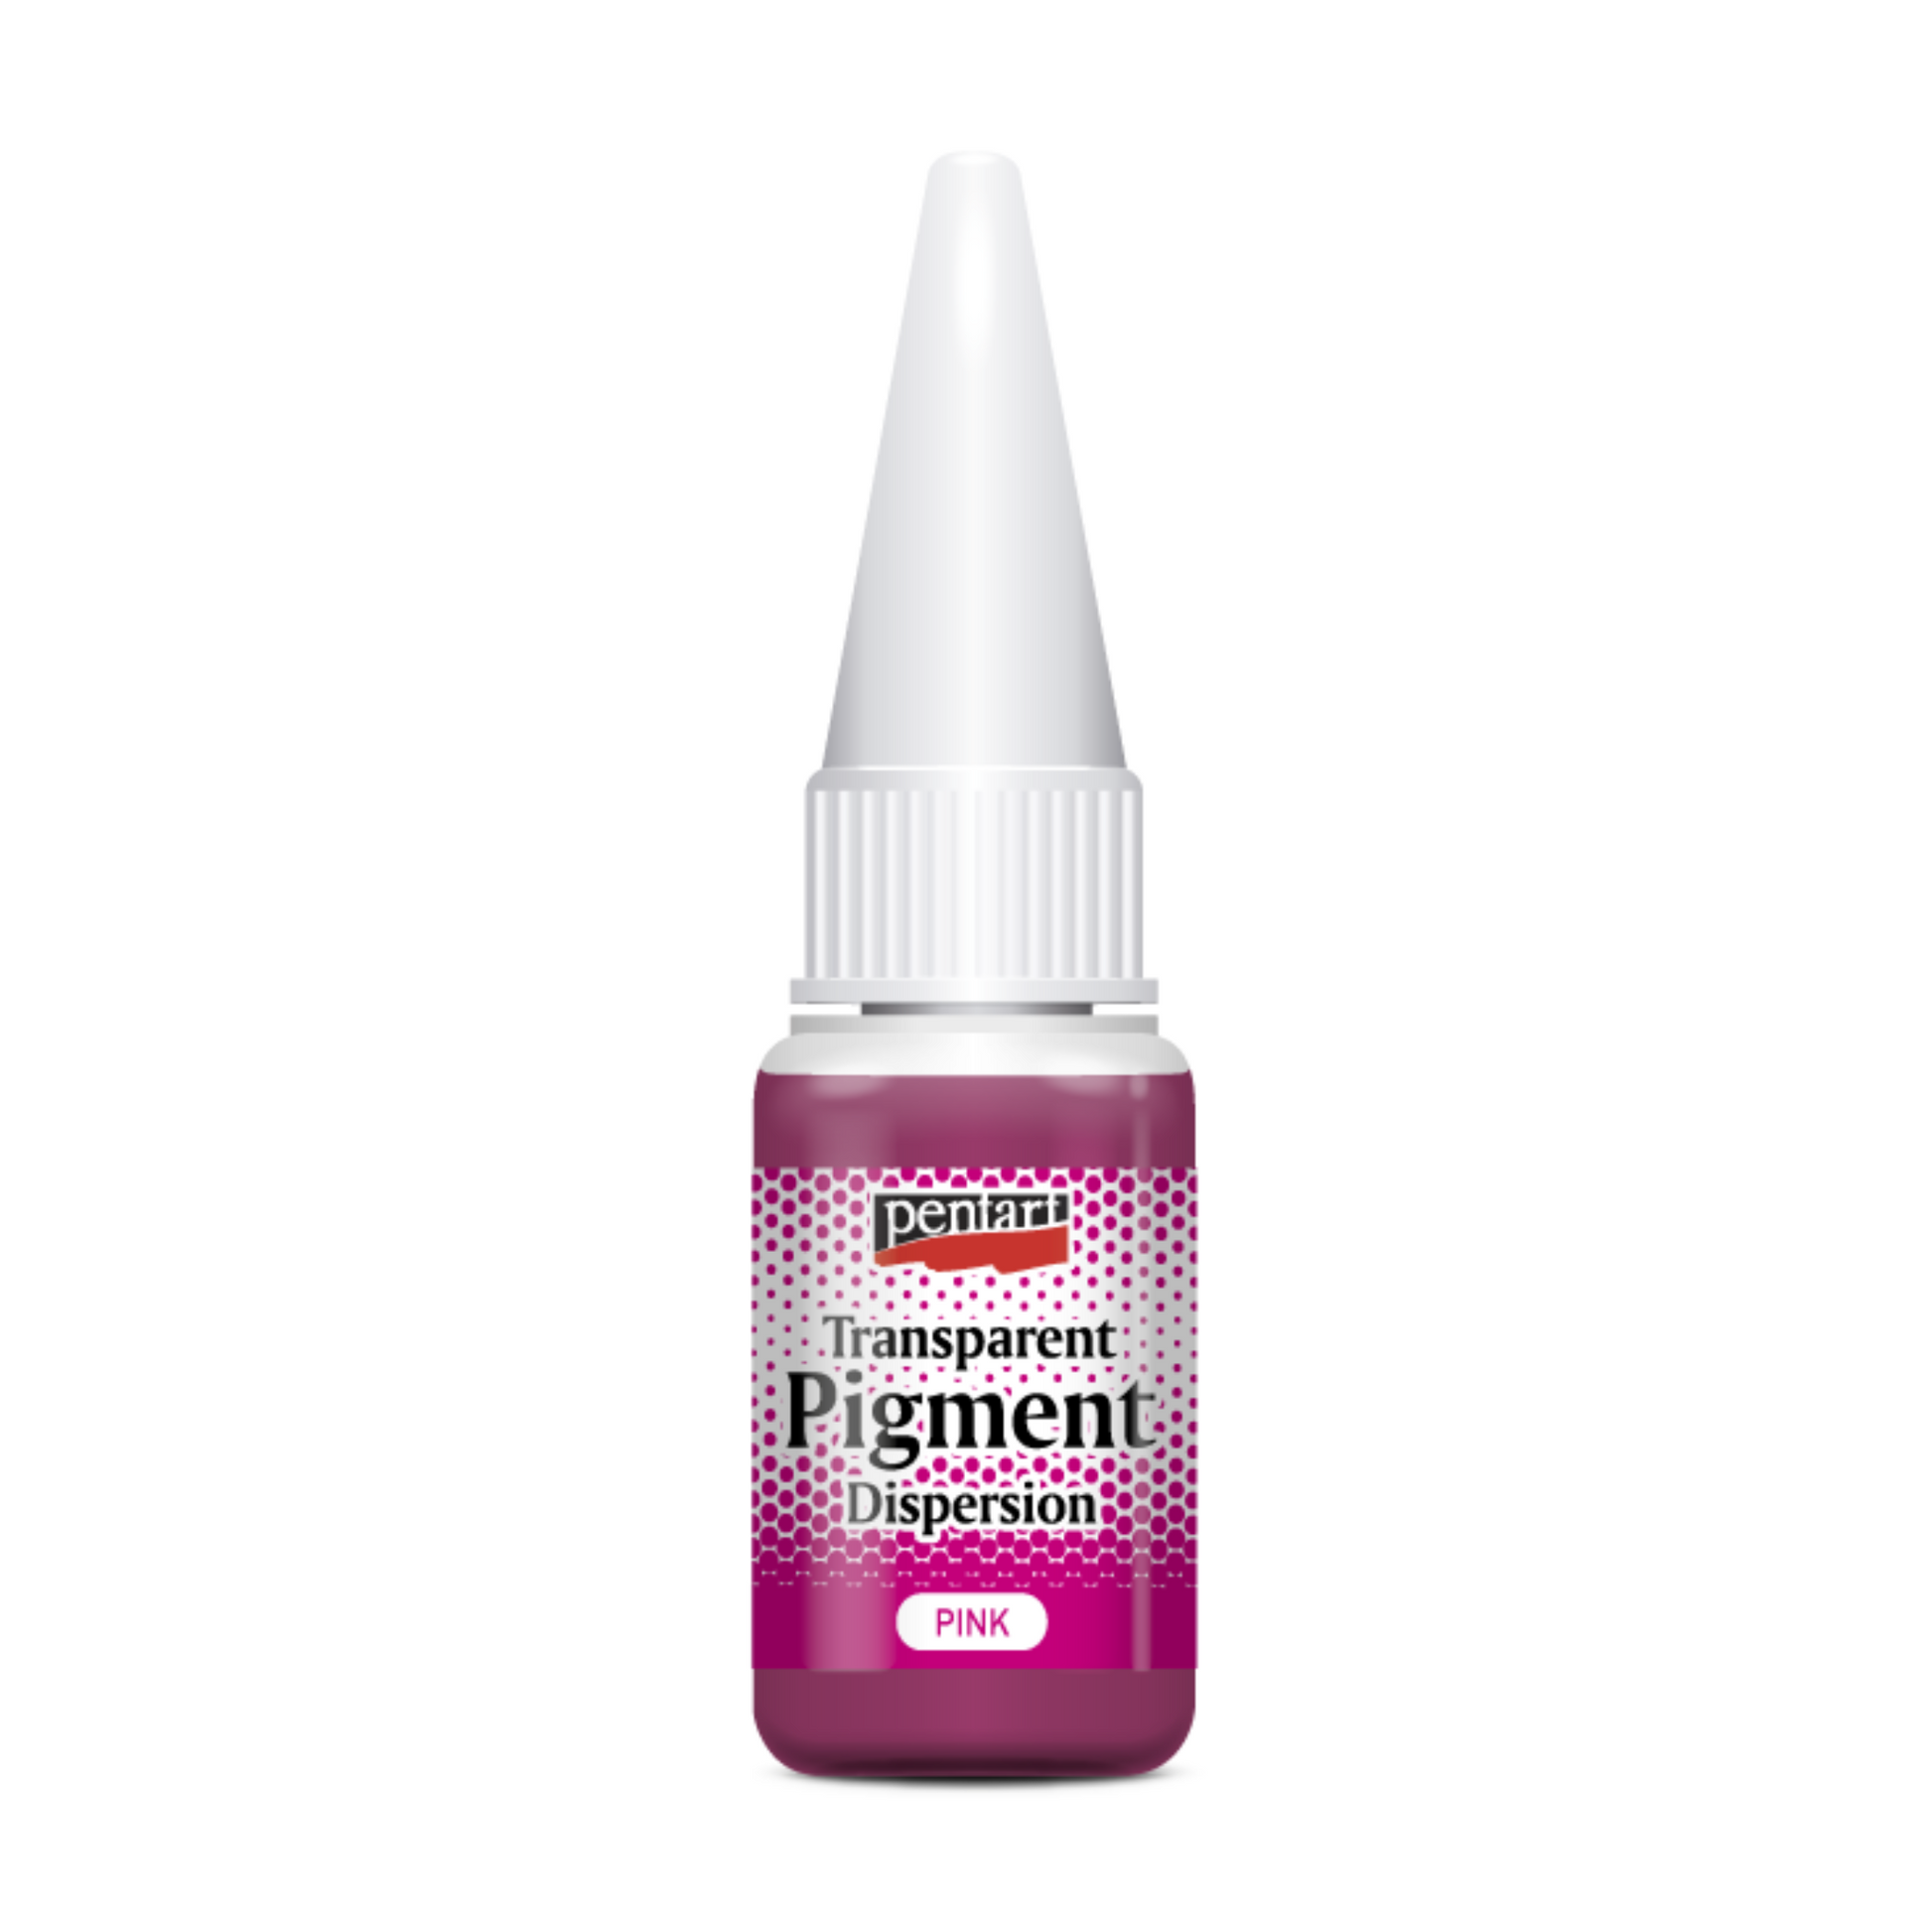 Transparent Pigment Dispersion in Pink by Pentart available at Milton's Daughter.